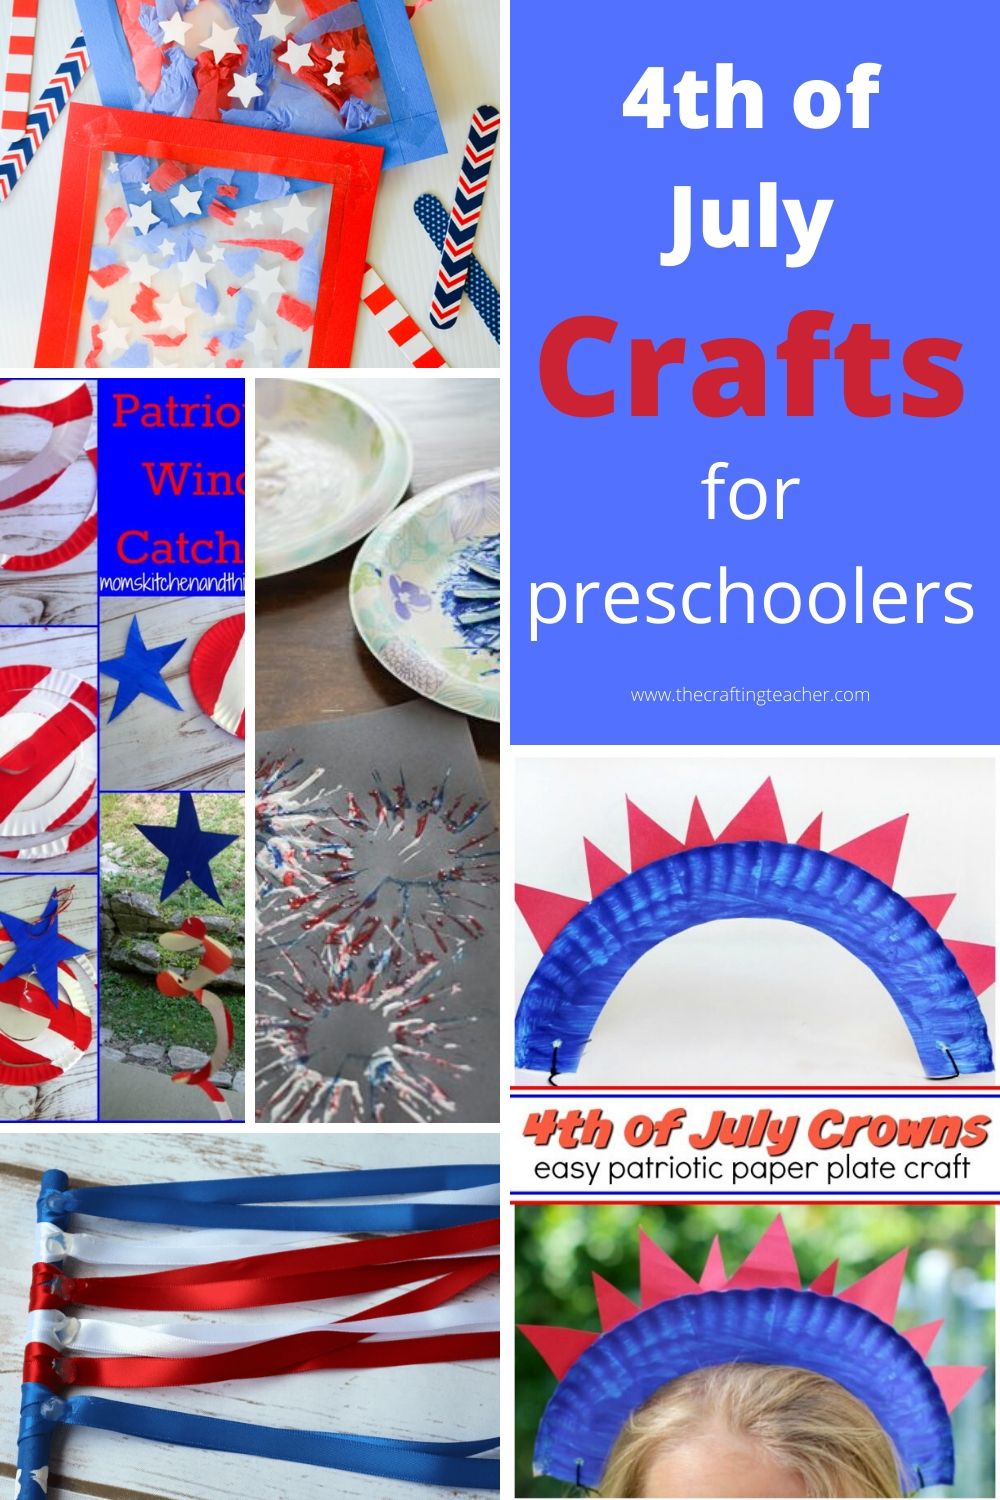 4th of July Activities for Preschoolers - The Crafting Teacher